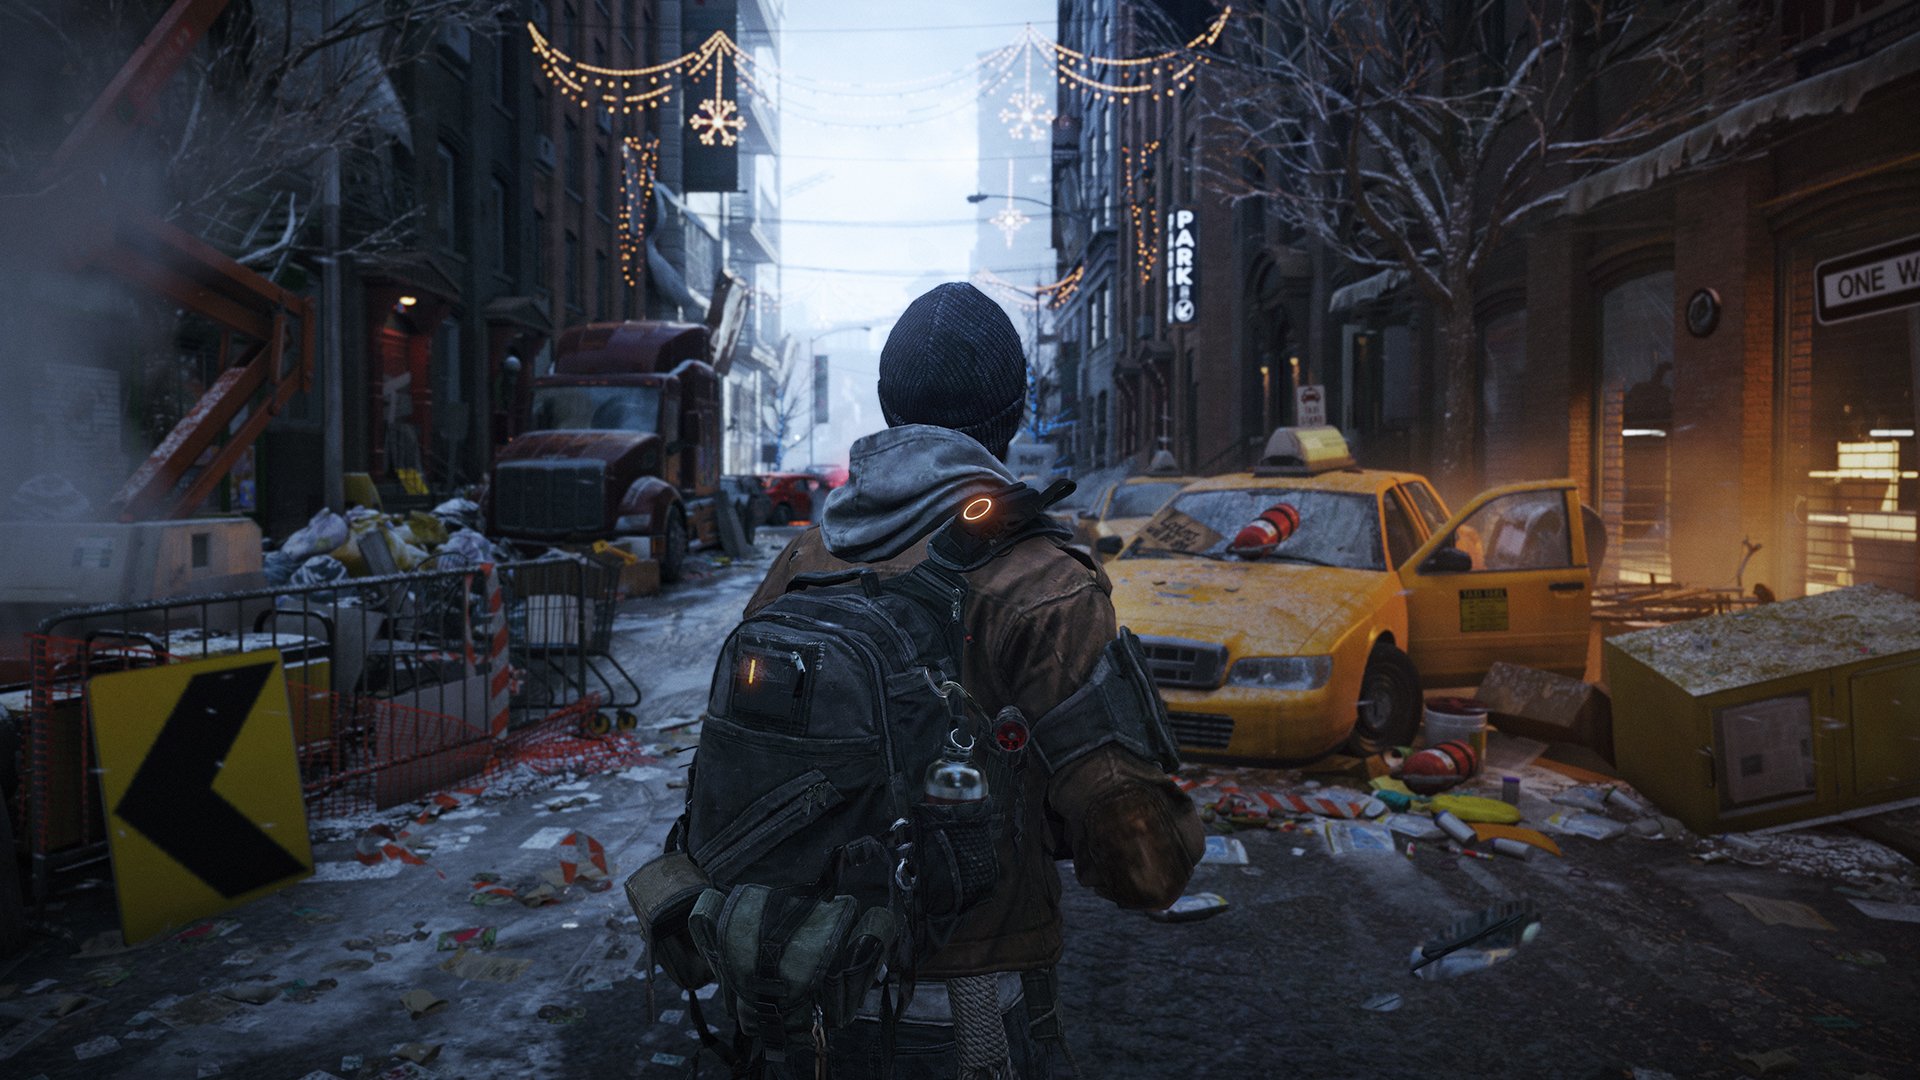 The Division movie